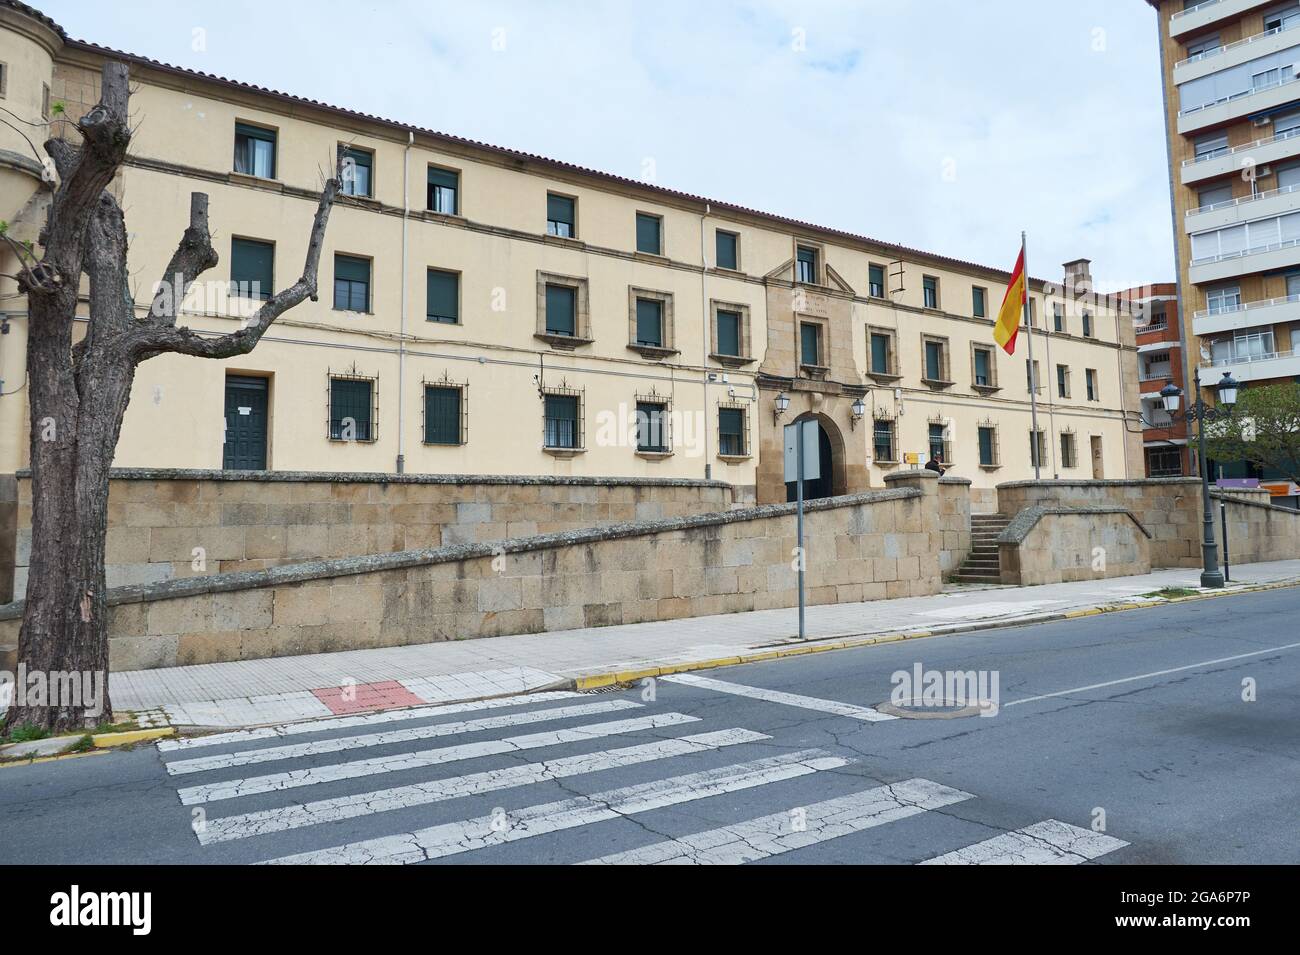 PLASENCIA, SPAIN - Apr 02, 2021: Barracks house of Guardia Civil in Plasencia, a village of Caceres province, Extremadura, Spain. cops Stock Photo